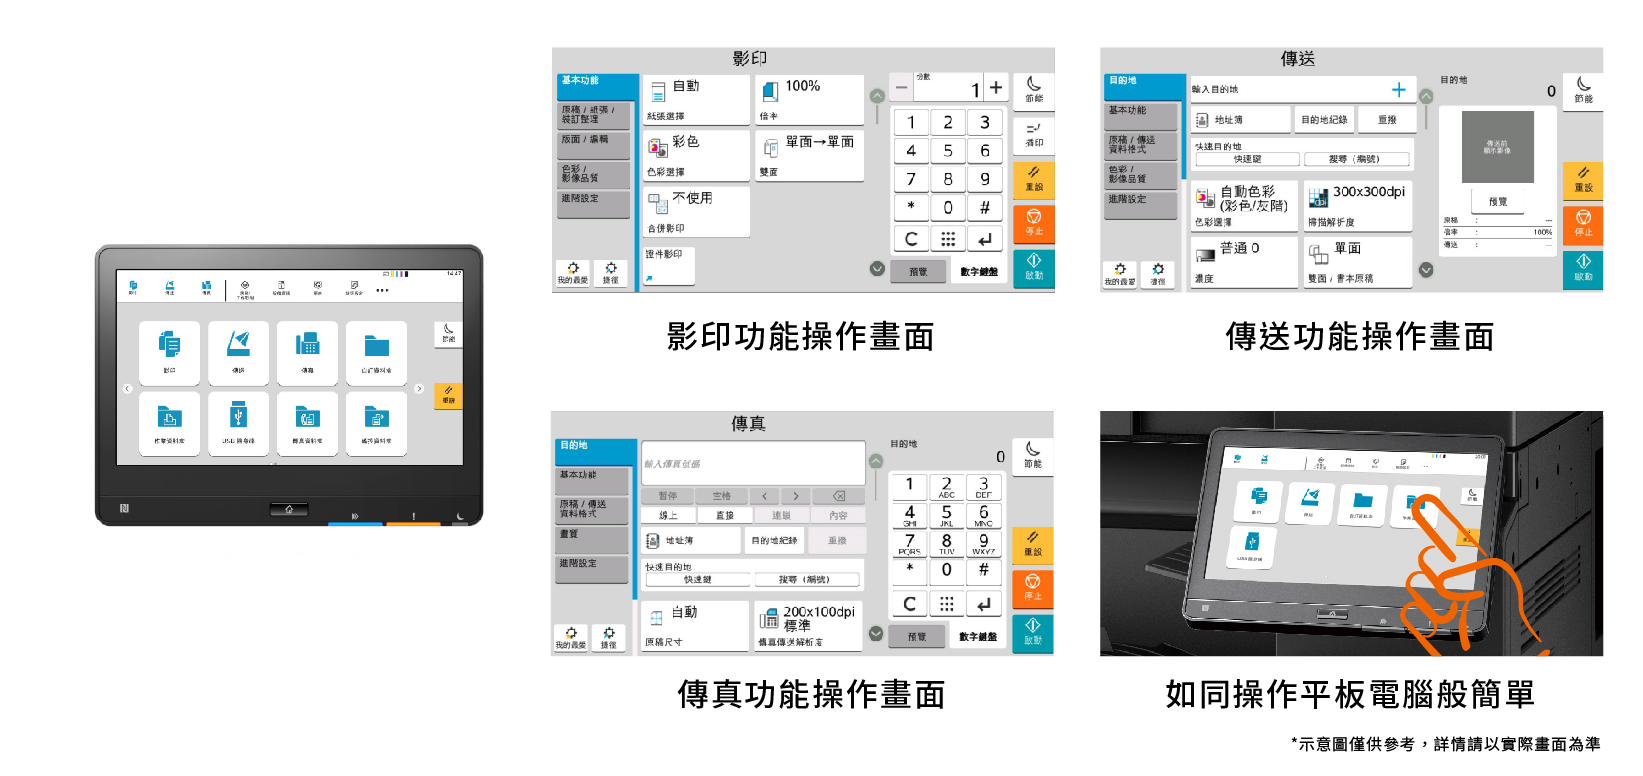 A new design touch panel that is simple and easy to operate